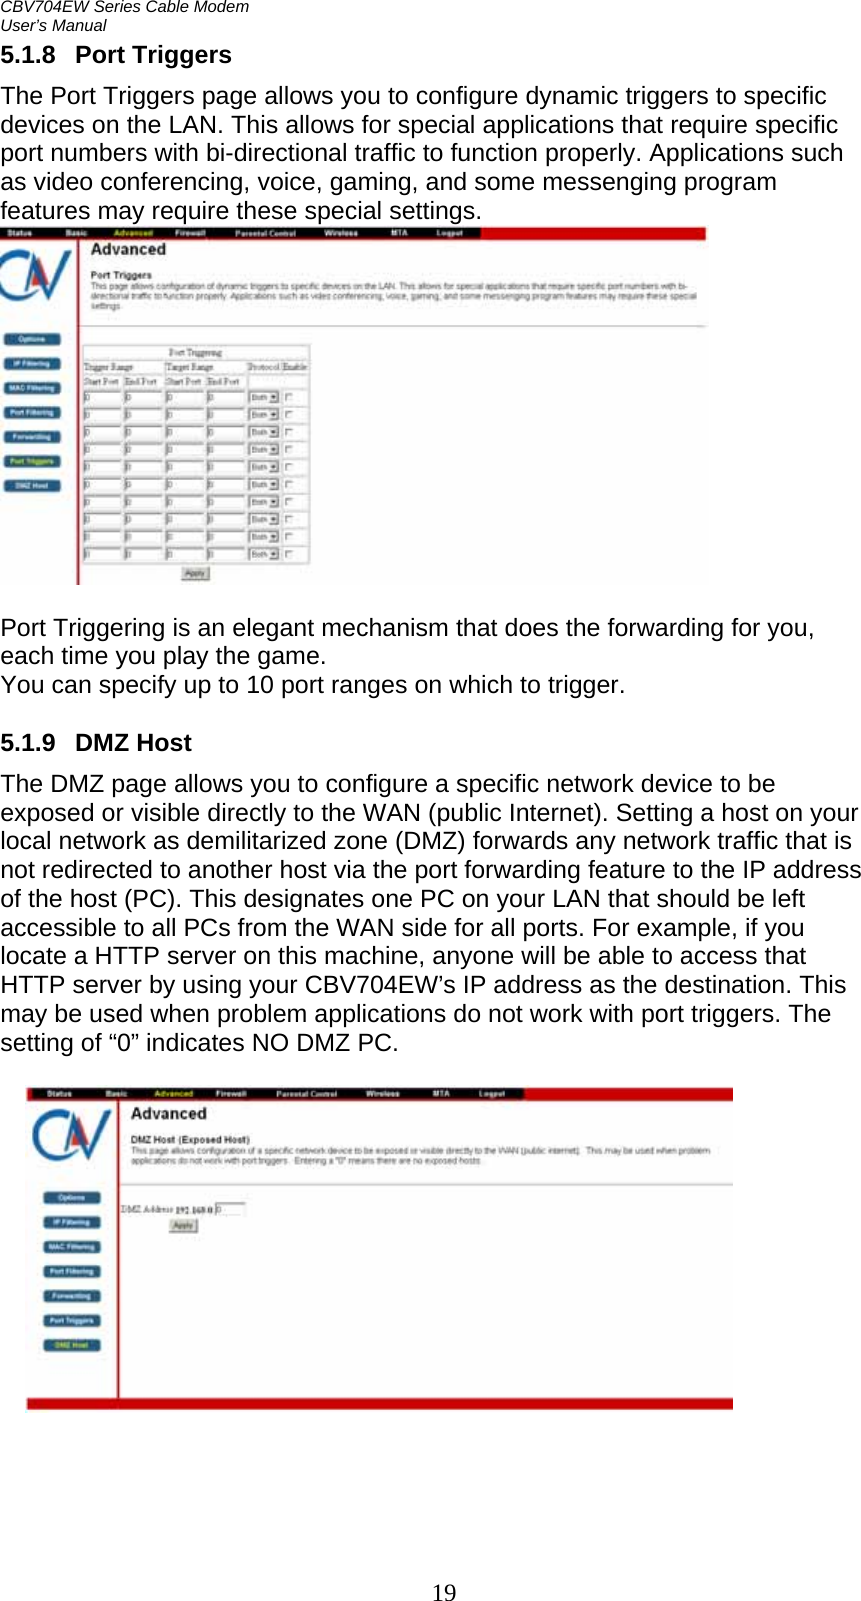 CBV704EW Series Cable Modem  User’s Manual   195.1.8 Port Triggers The Port Triggers page allows you to configure dynamic triggers to specific devices on the LAN. This allows for special applications that require specific port numbers with bi-directional traffic to function properly. Applications such as video conferencing, voice, gaming, and some messenging program features may require these special settings.    Port Triggering is an elegant mechanism that does the forwarding for you, each time you play the game. You can specify up to 10 port ranges on which to trigger.  5.1.9 DMZ Host The DMZ page allows you to configure a specific network device to be exposed or visible directly to the WAN (public Internet). Setting a host on your local network as demilitarized zone (DMZ) forwards any network traffic that is not redirected to another host via the port forwarding feature to the IP address of the host (PC). This designates one PC on your LAN that should be left accessible to all PCs from the WAN side for all ports. For example, if you locate a HTTP server on this machine, anyone will be able to access that HTTP server by using your CBV704EW’s IP address as the destination. This may be used when problem applications do not work with port triggers. The setting of “0” indicates NO DMZ PC.   